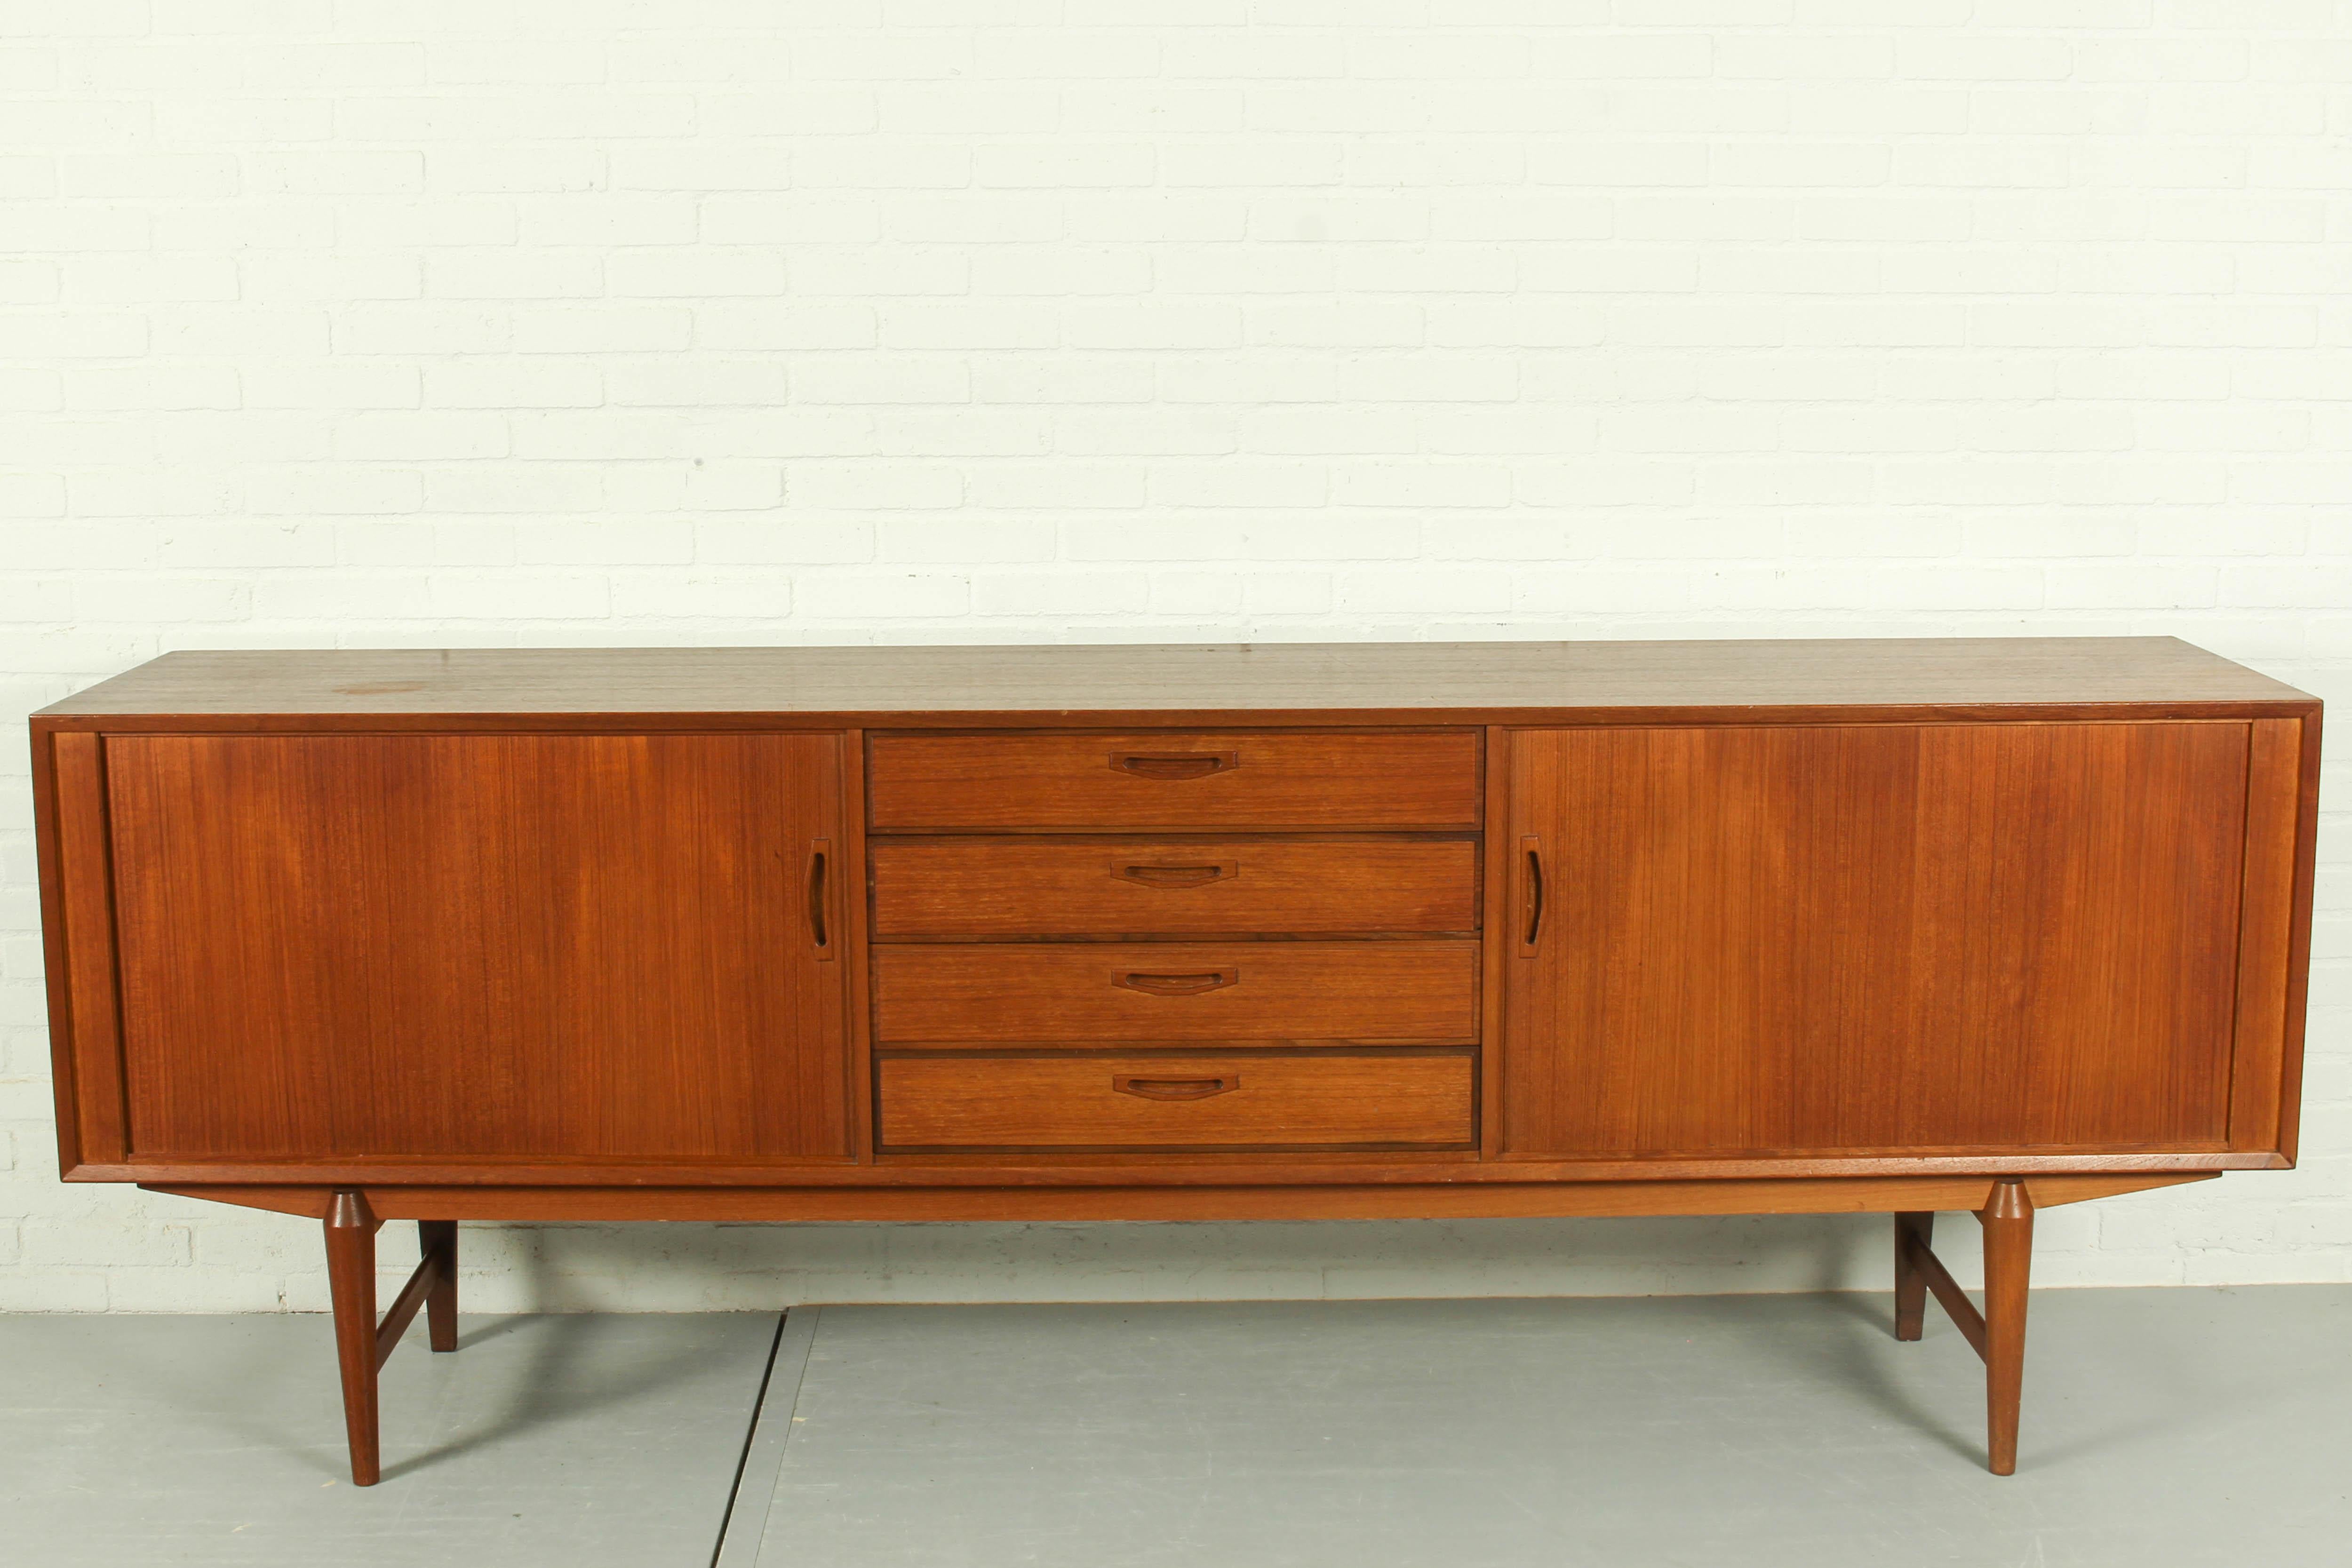 Rare teak sideboard by Omer Lefevre for OMF. The cabinet has four drawers and two beautiful tambour doors. Built to a high standard. In very good condition with traces of use in accordance with age. 

Dimensions: 240cm, 86cm h, 47cm d.
